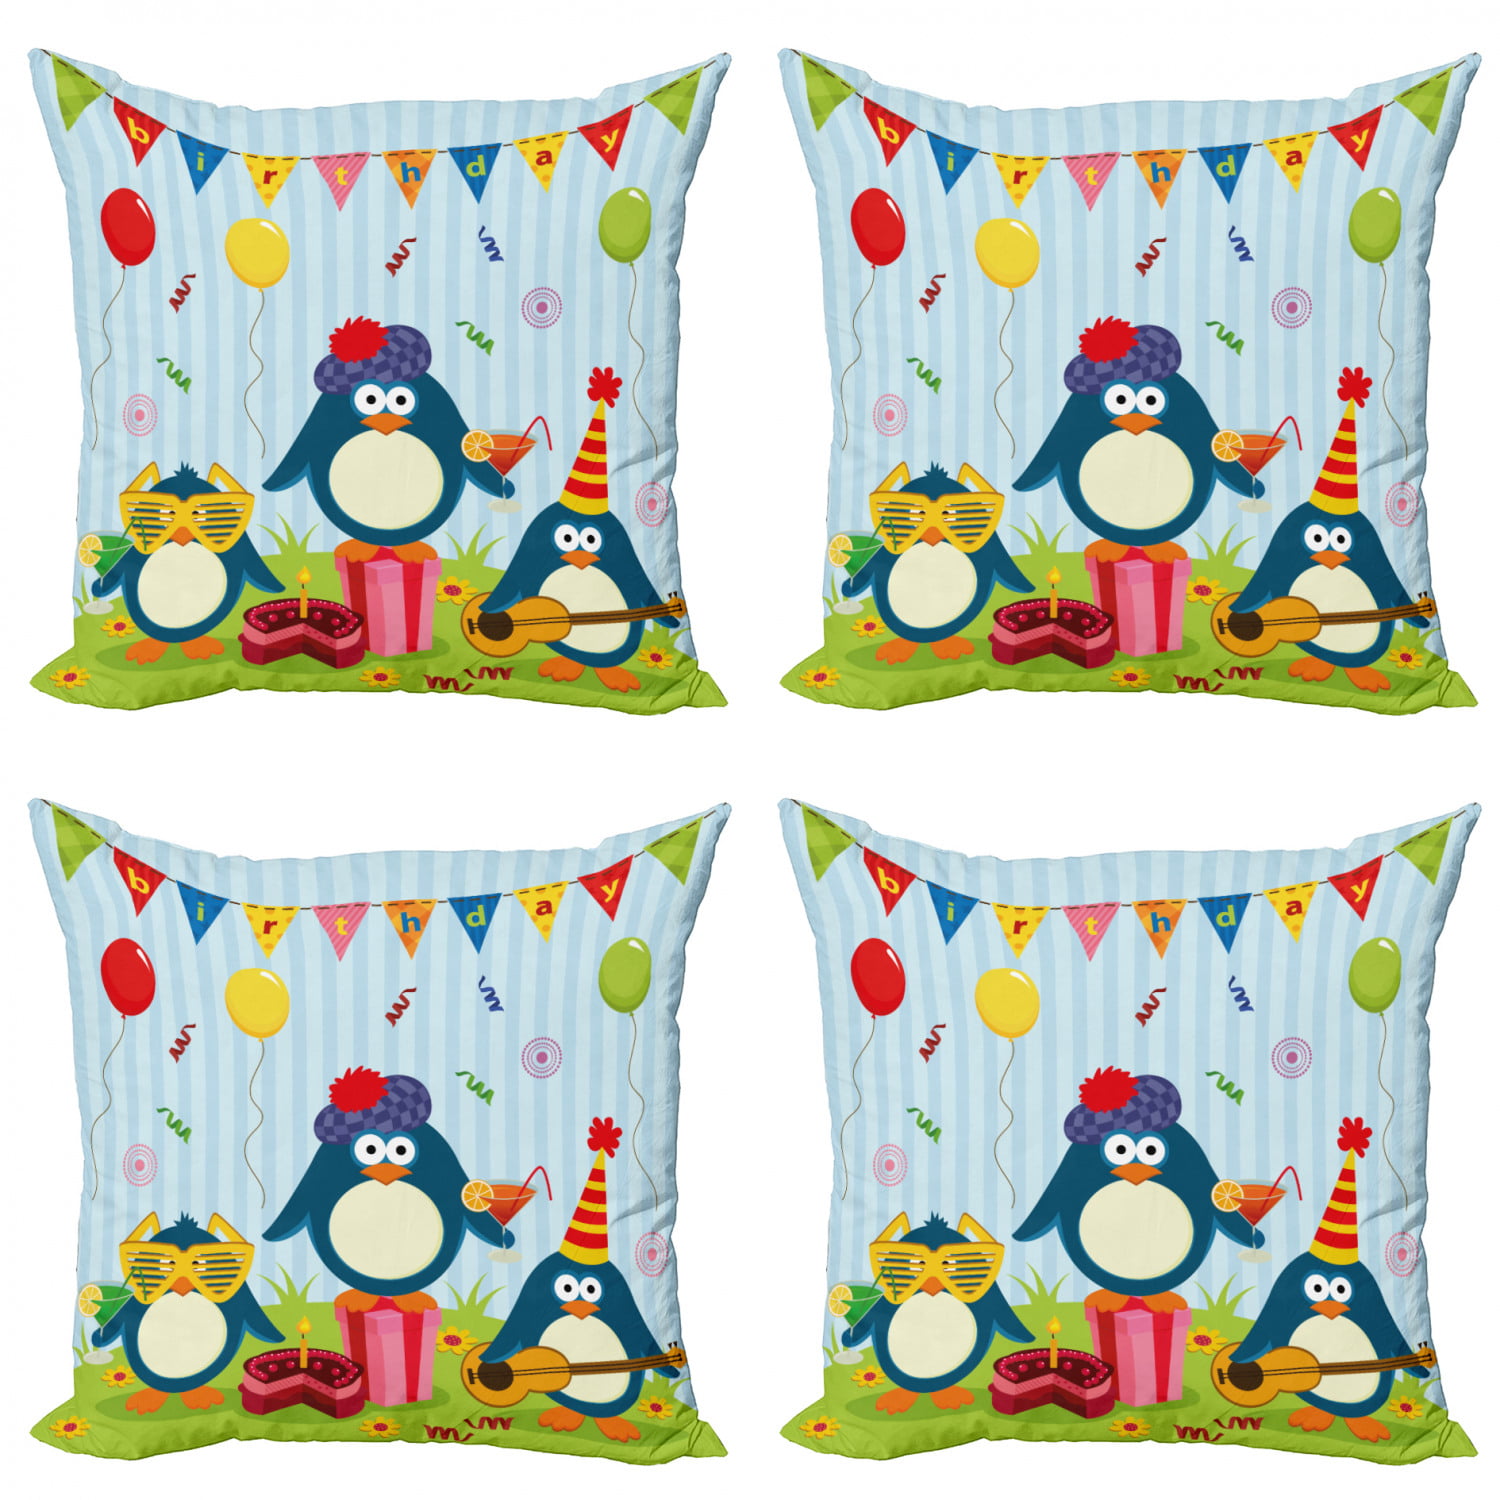 Christmas Starry Penguin Baby Pink Handmade cushion cover/pillow case 16x16 inch 